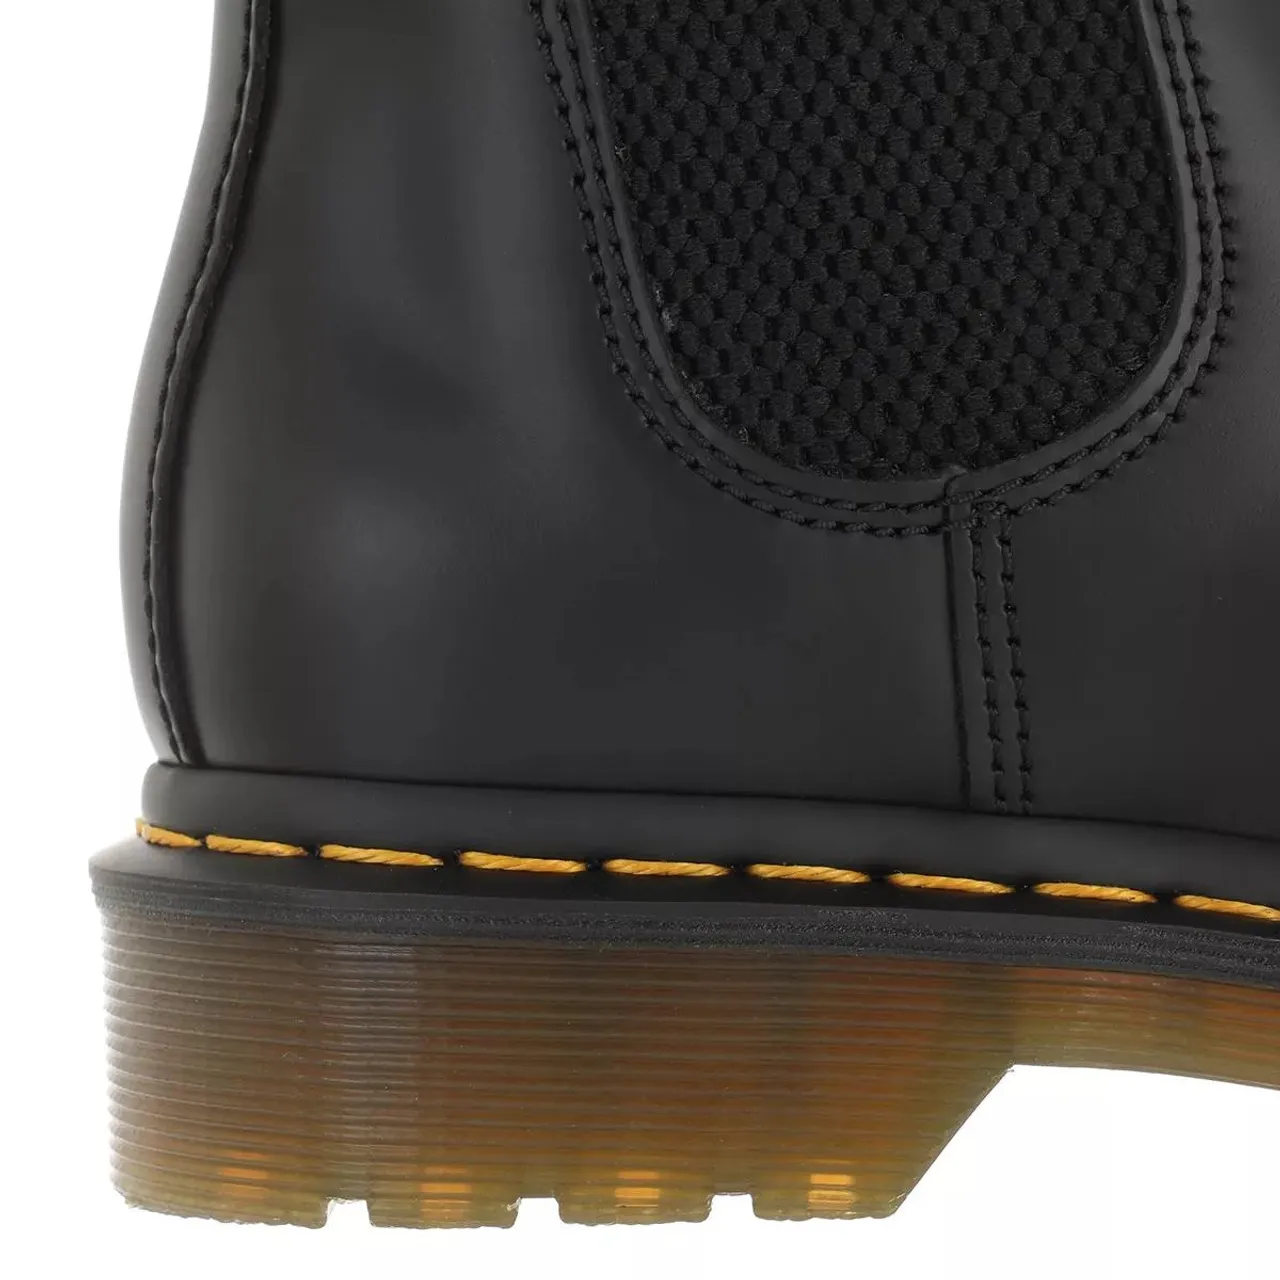 Dr. Martens Boots & Ankle Boots - Chelsea Boot - black - Boots & Ankle Boots for ladies